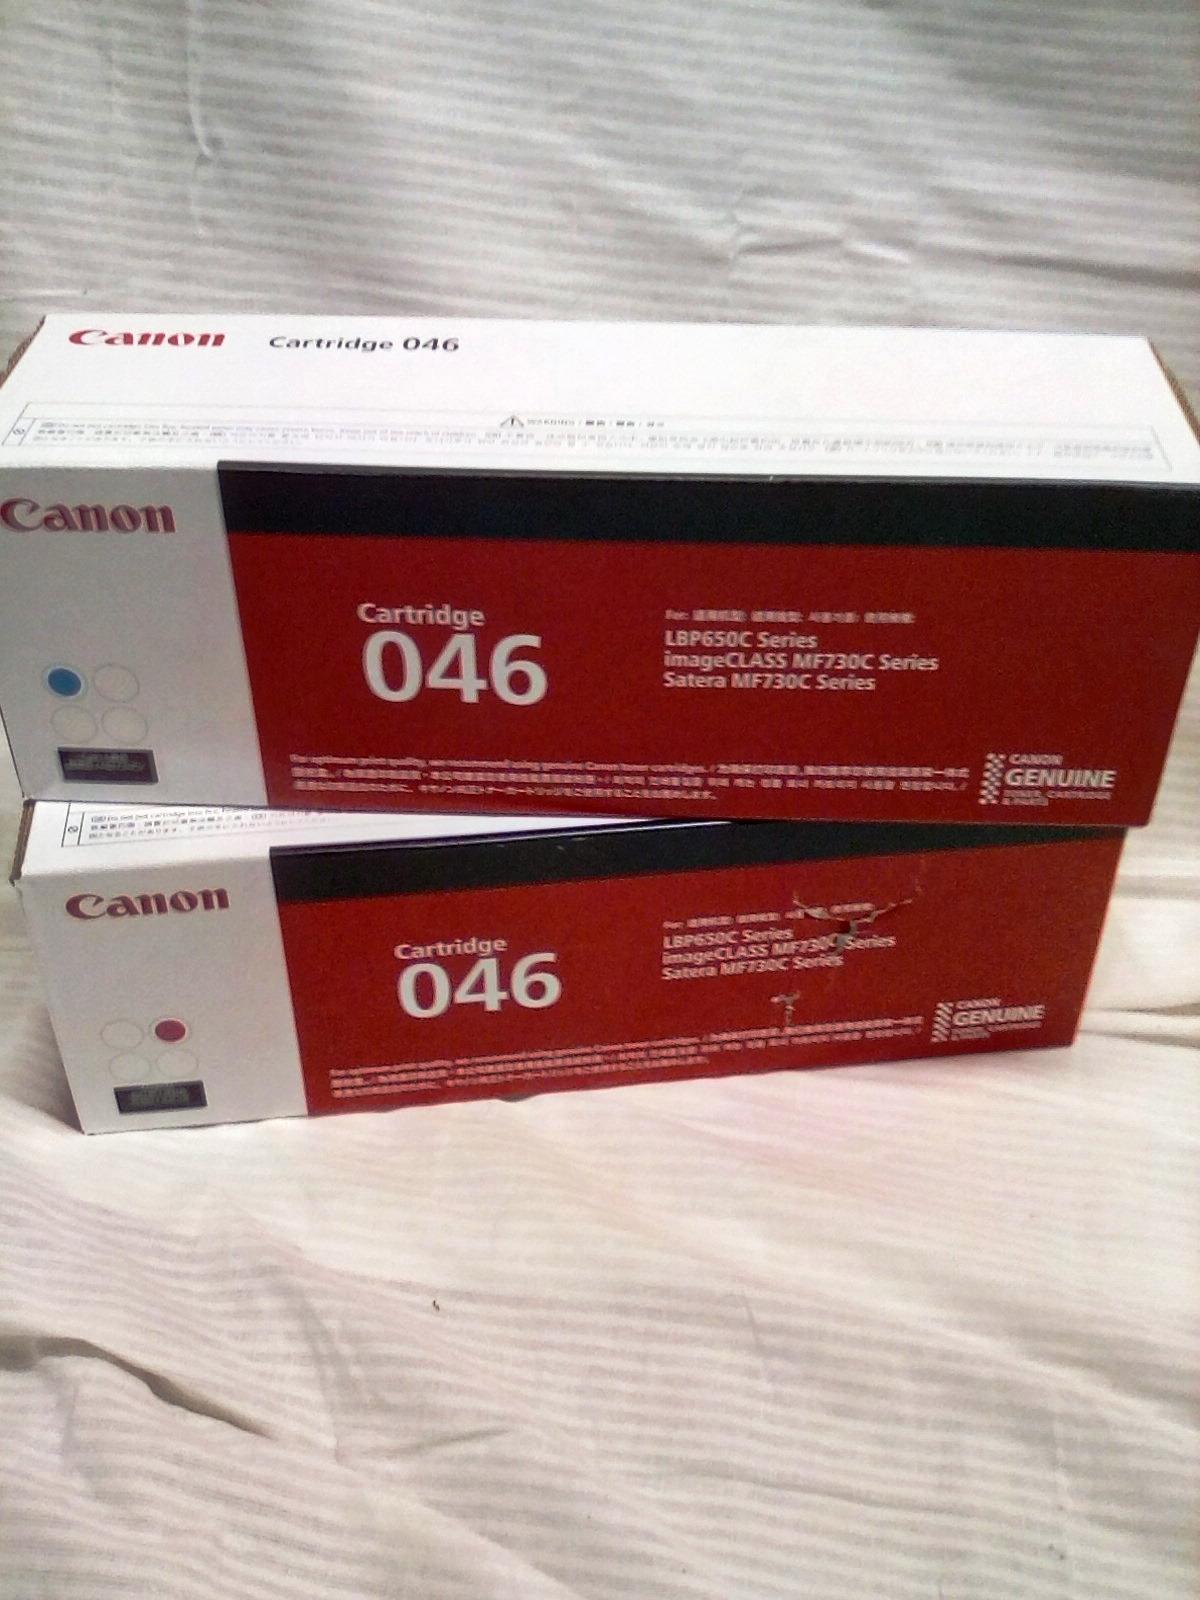 Cannon Ink Cartridges AMZ $88.99 up to $116.99 each